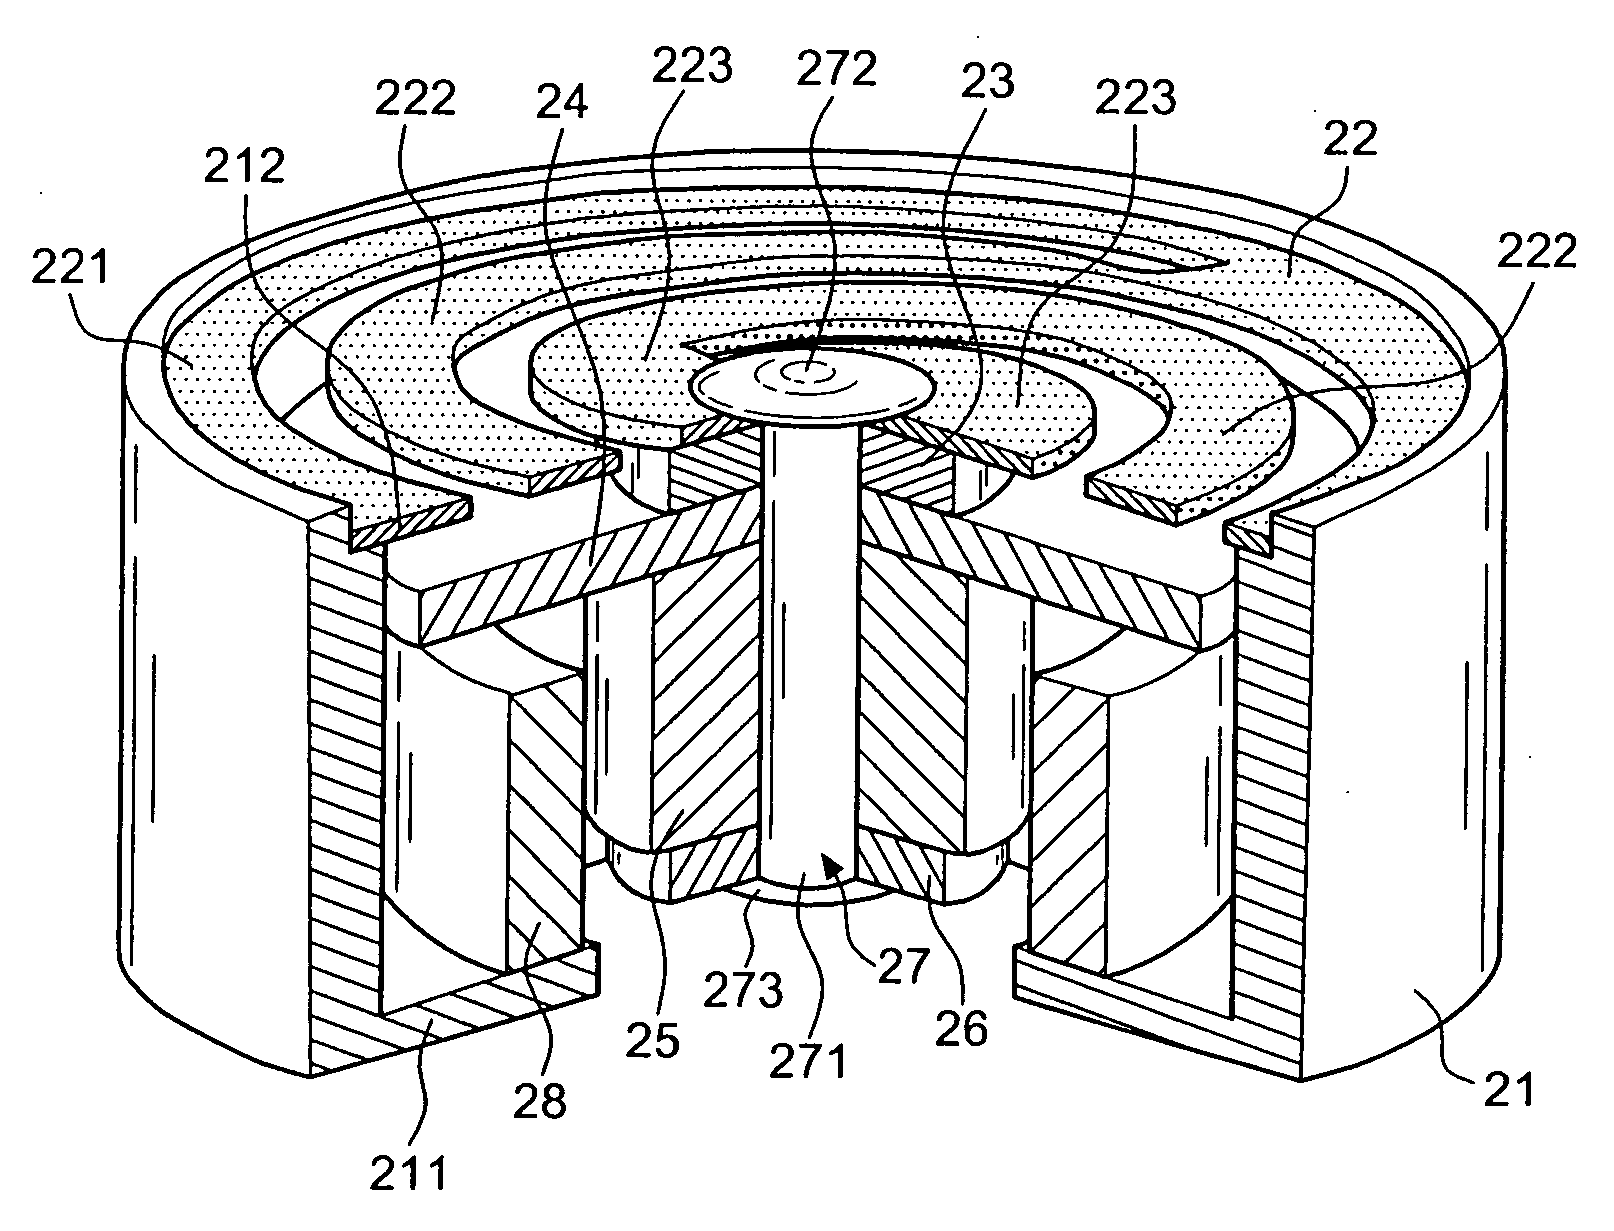 Loudspeaker with low-frequency oscillation